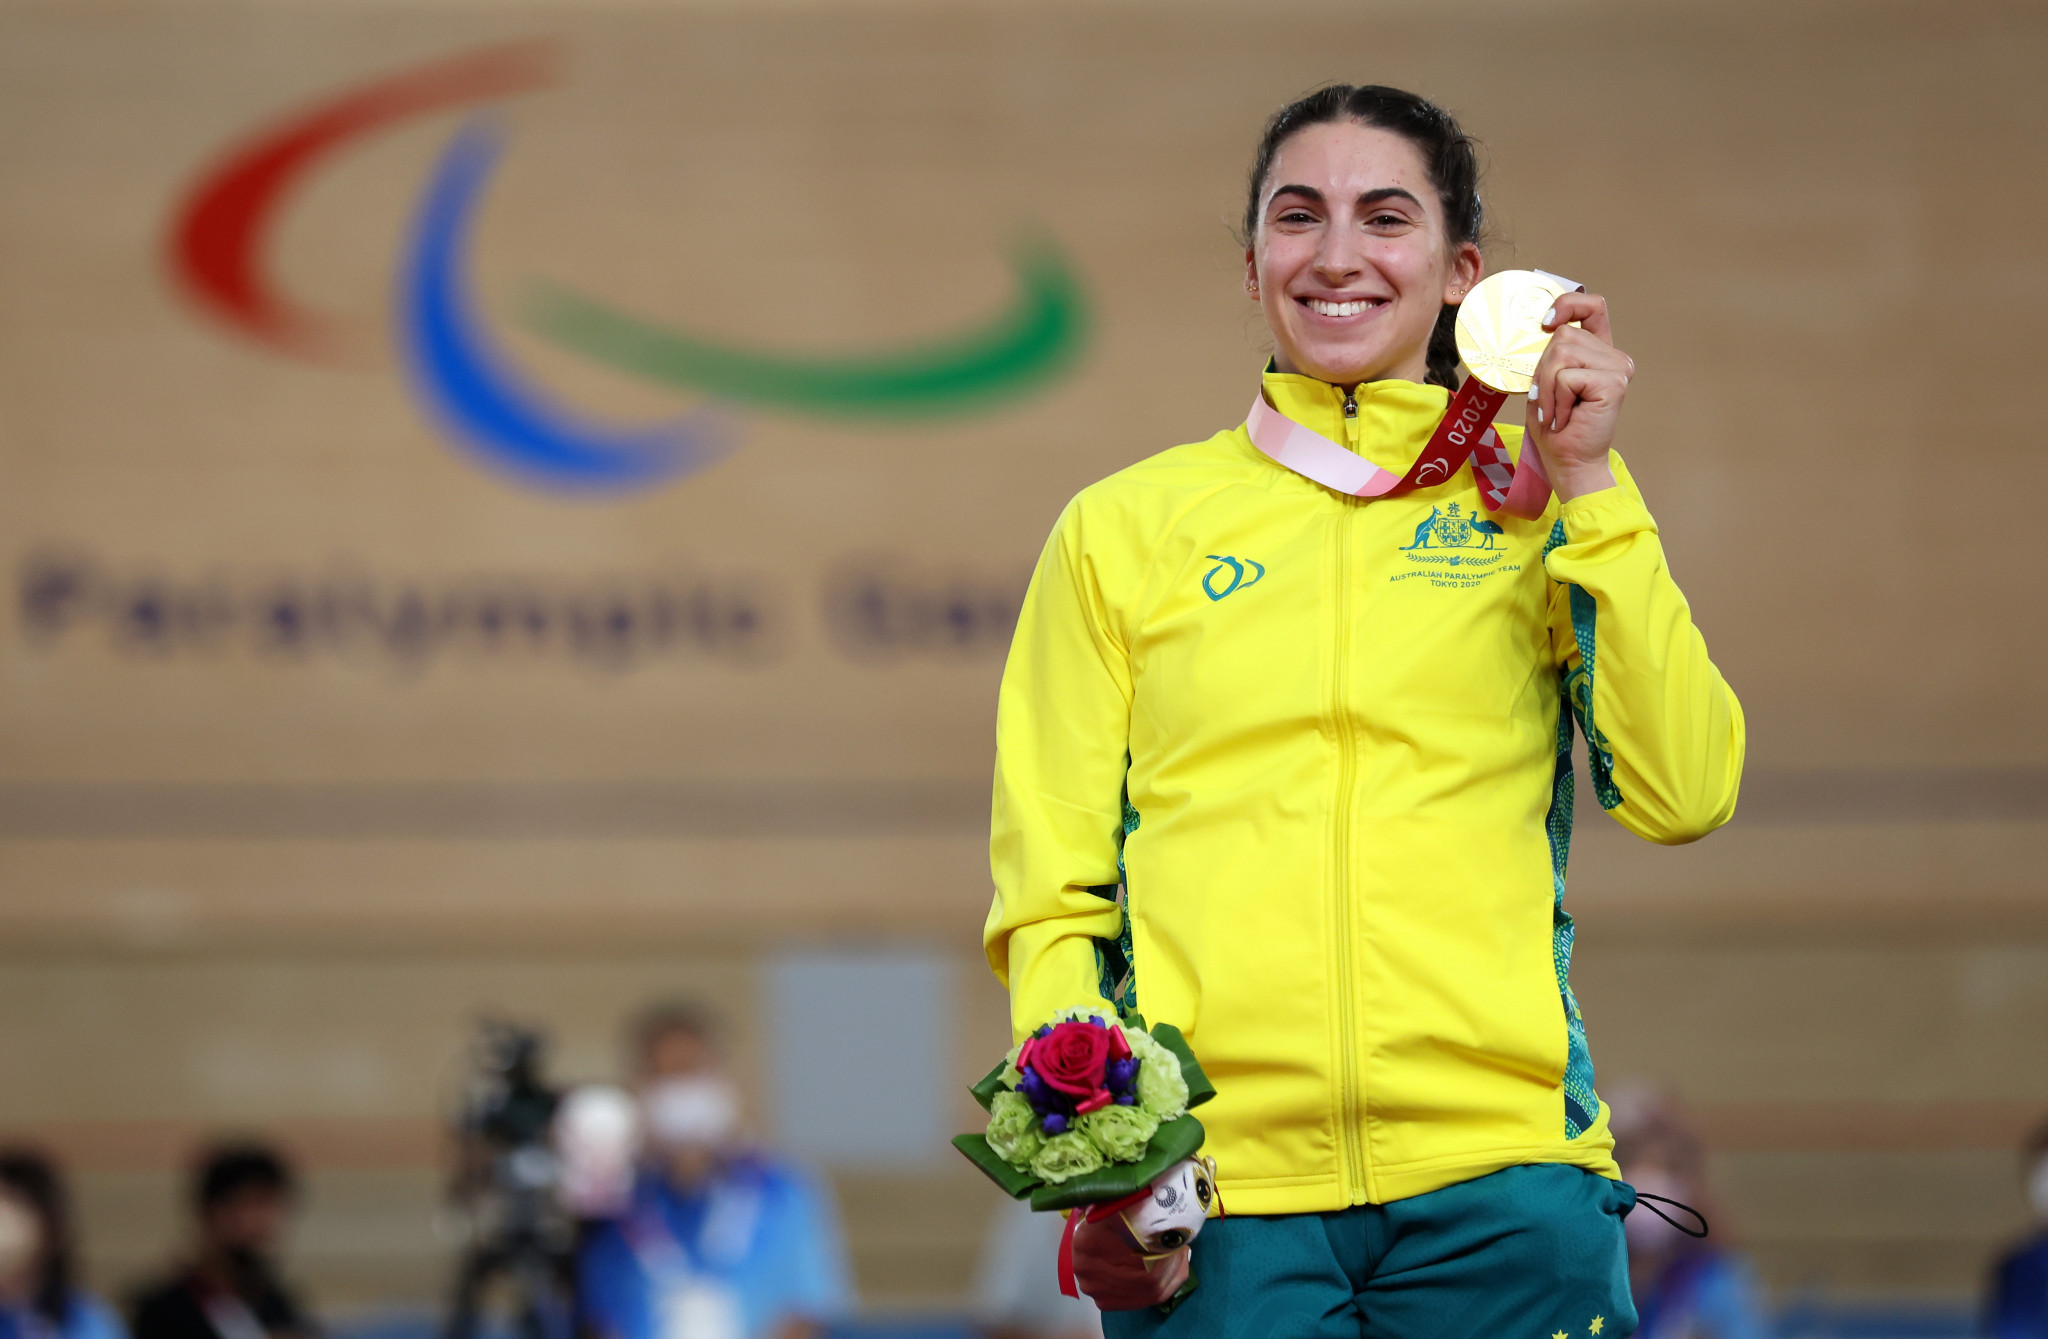 Paige Greco was one of two Australians to win track cycling gold on the opening day of the Tokyo 2020 Paralympics ©Getty Images